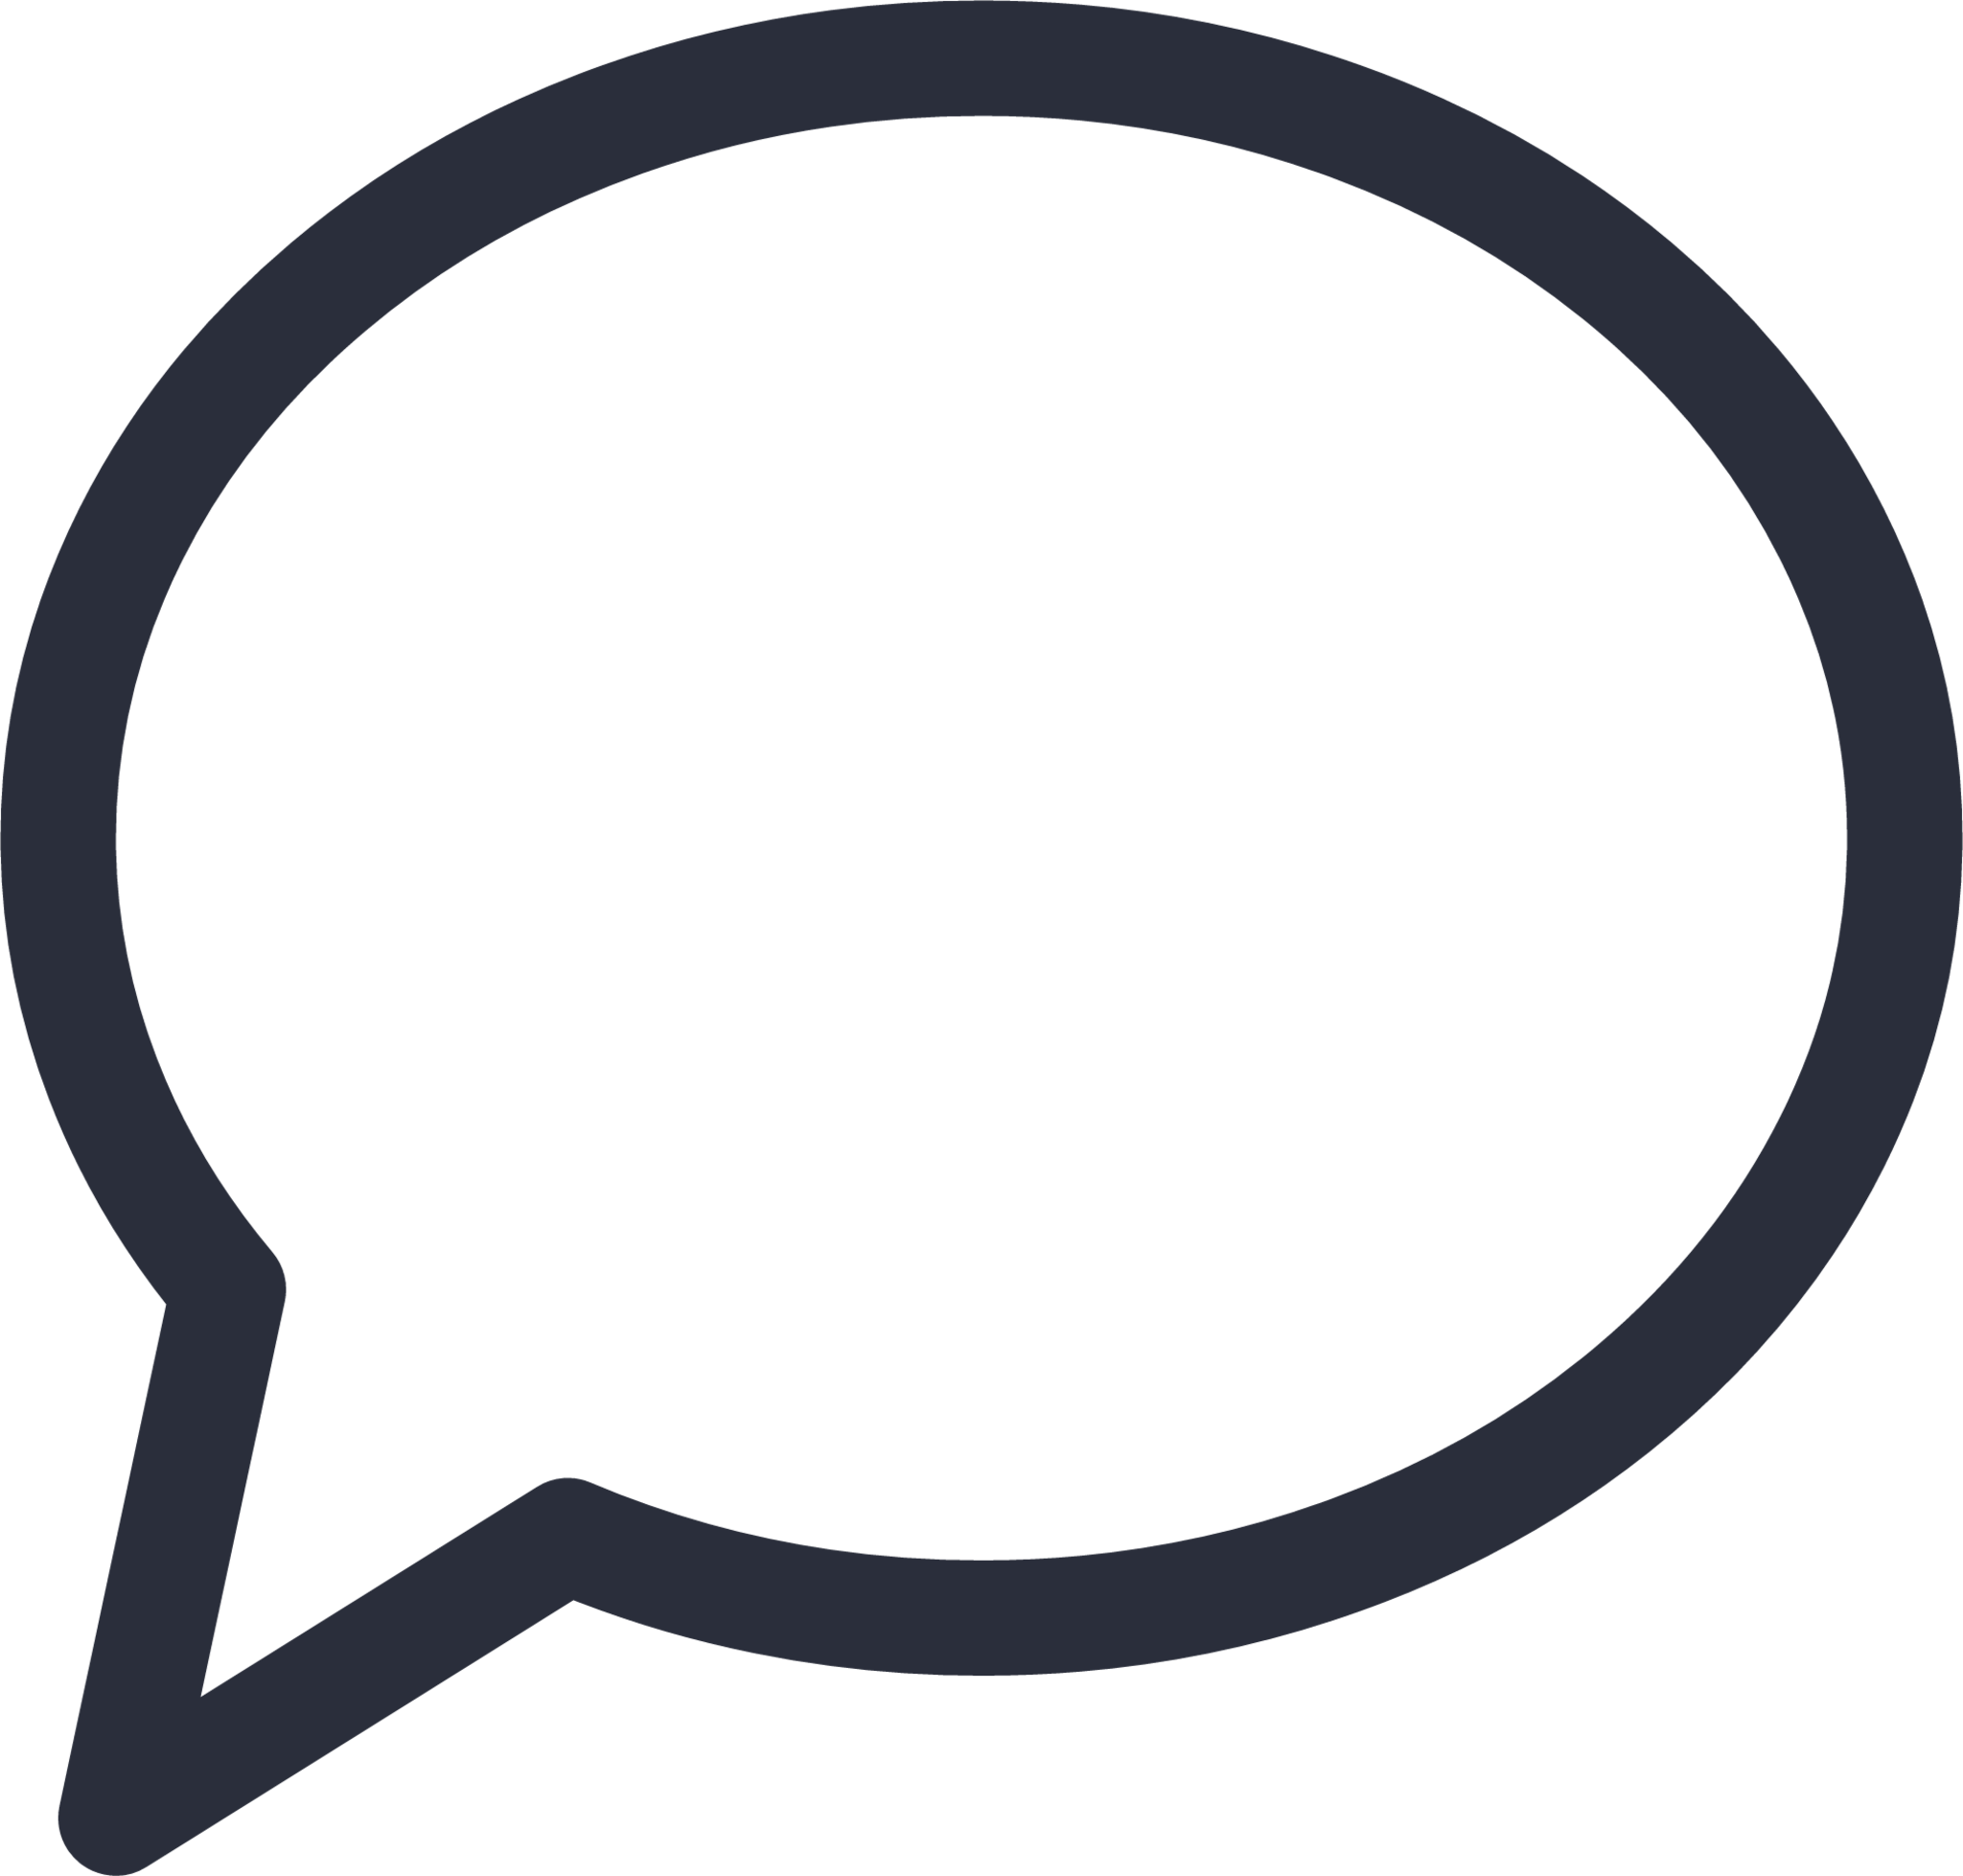 Think Bubble PNG Image File